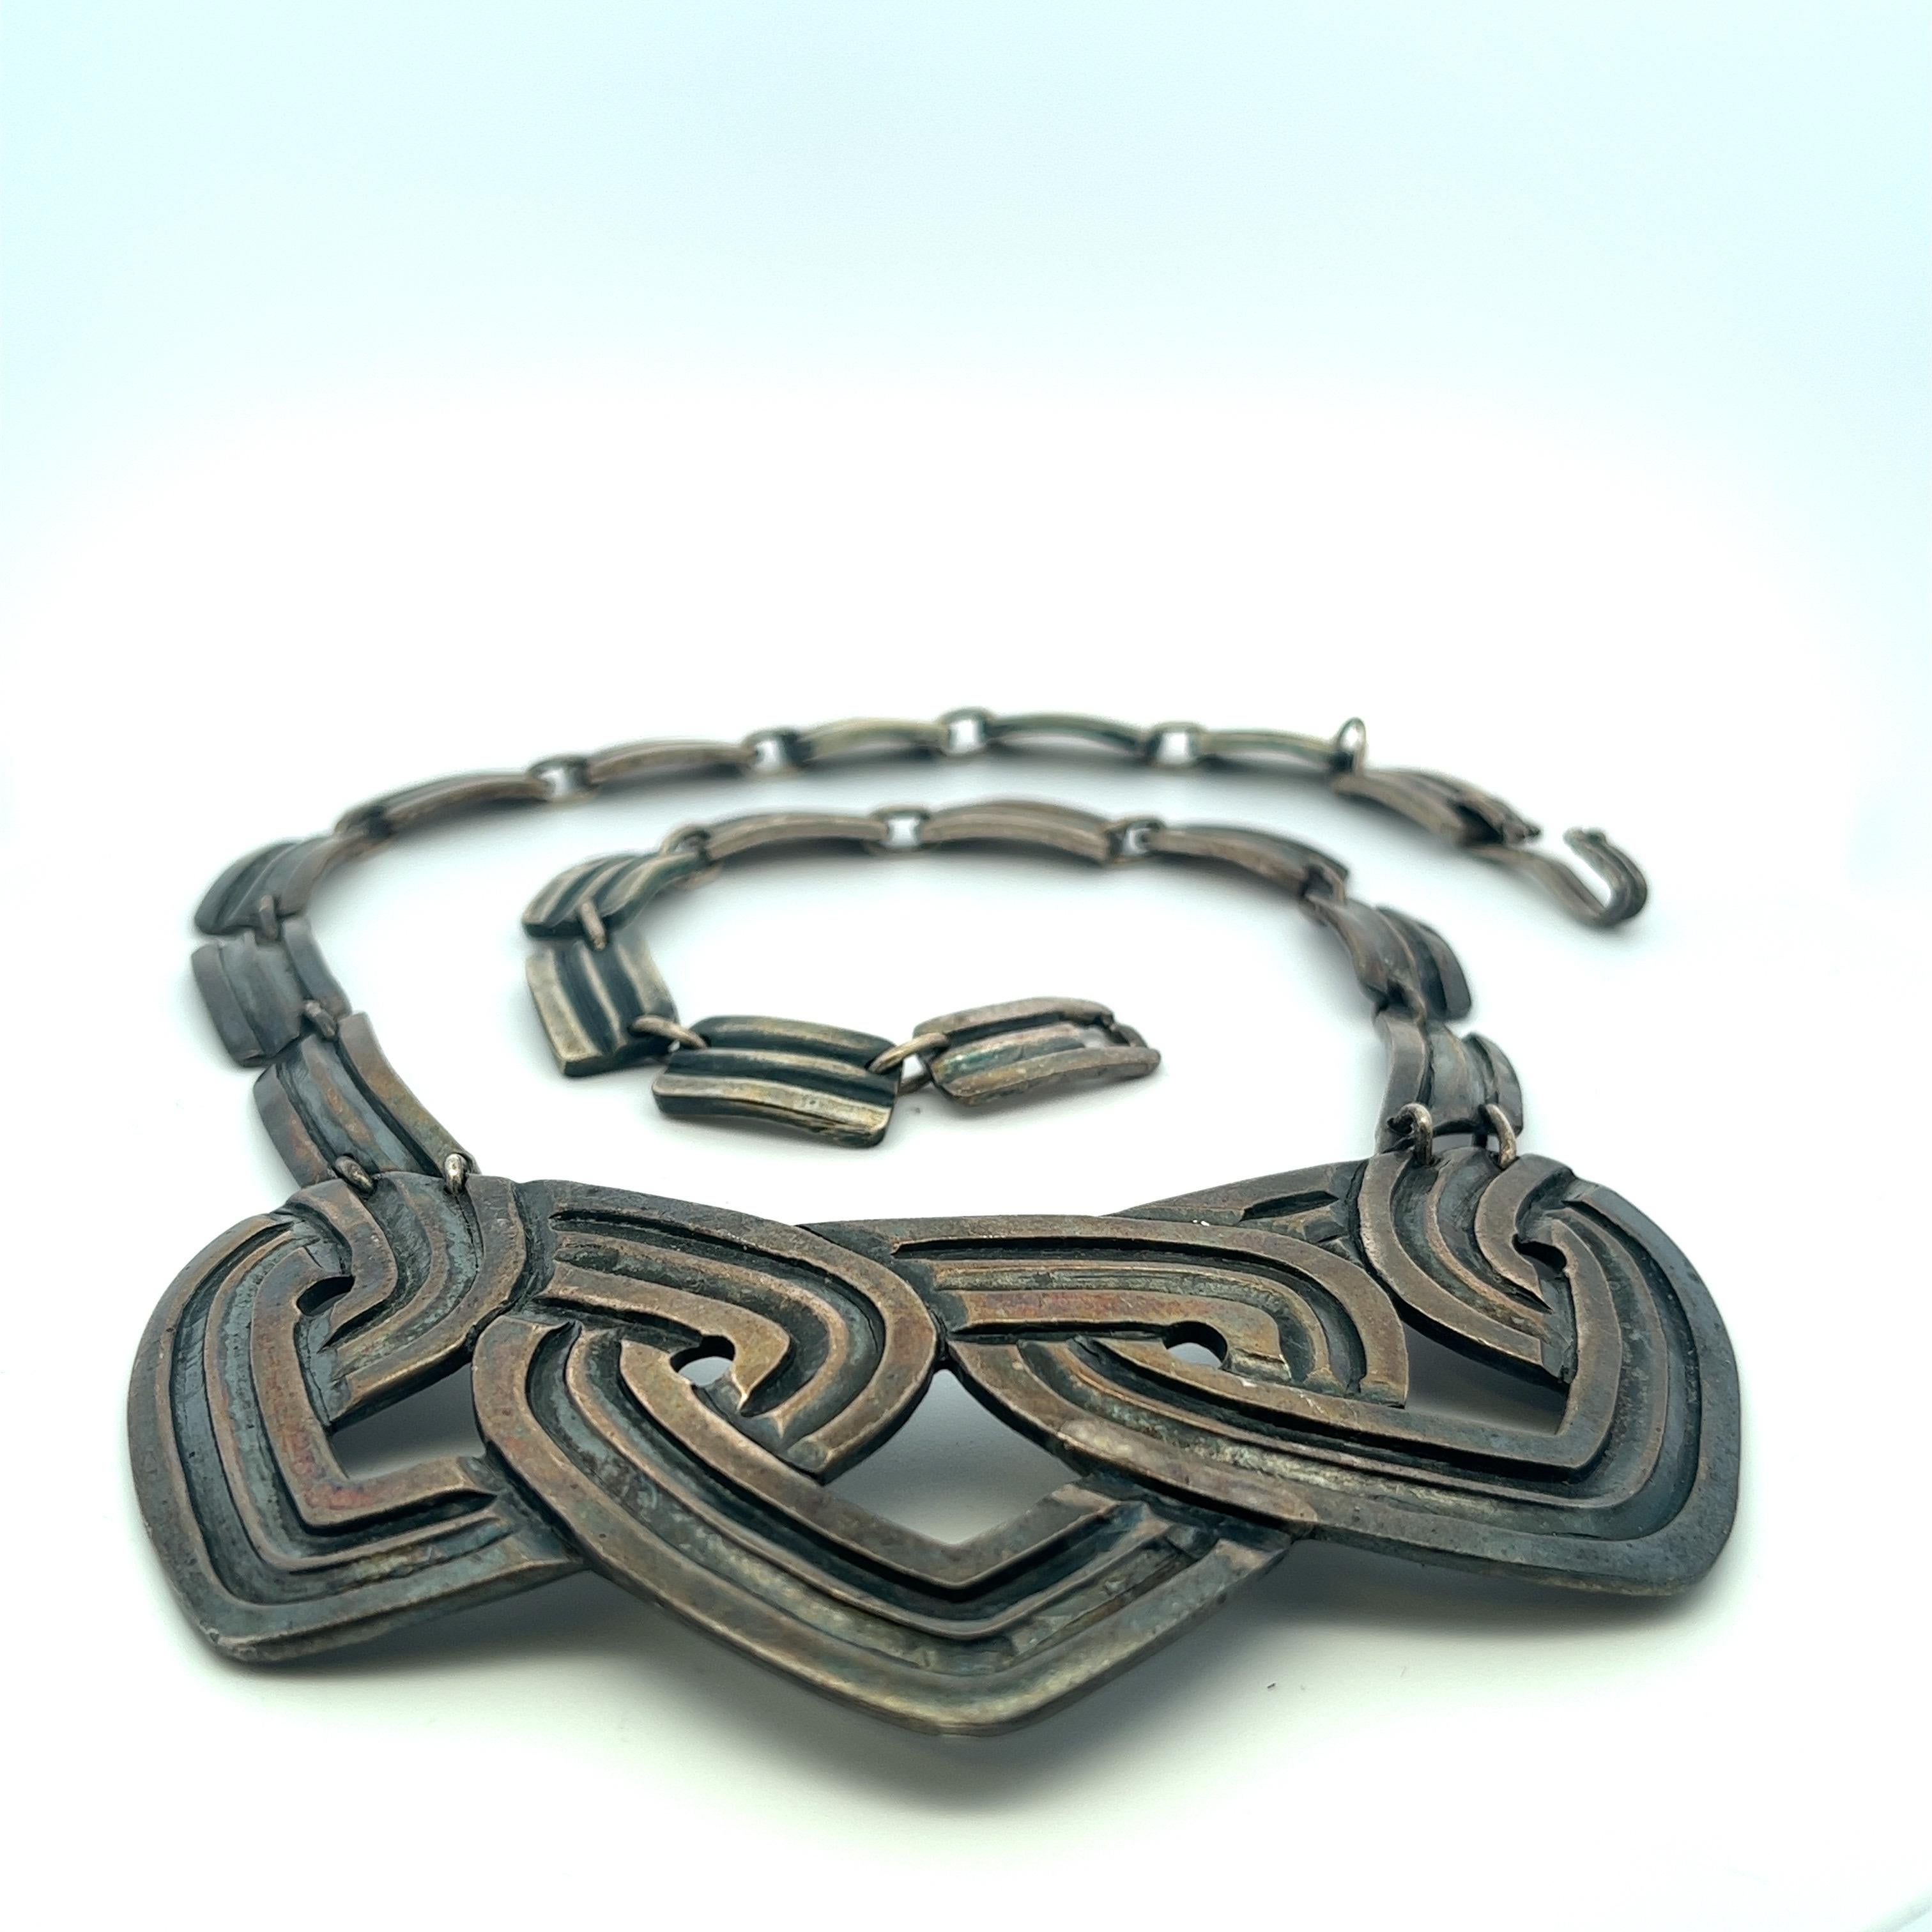 Introducing a rare and exceptional Los Castillo necklace featuring a beautiful and natural patina.  Dating back to the 1940s in Taxco, Mexico, this vintage piece showcases a distinctive choker-style design, draping gracefully on the chest with an